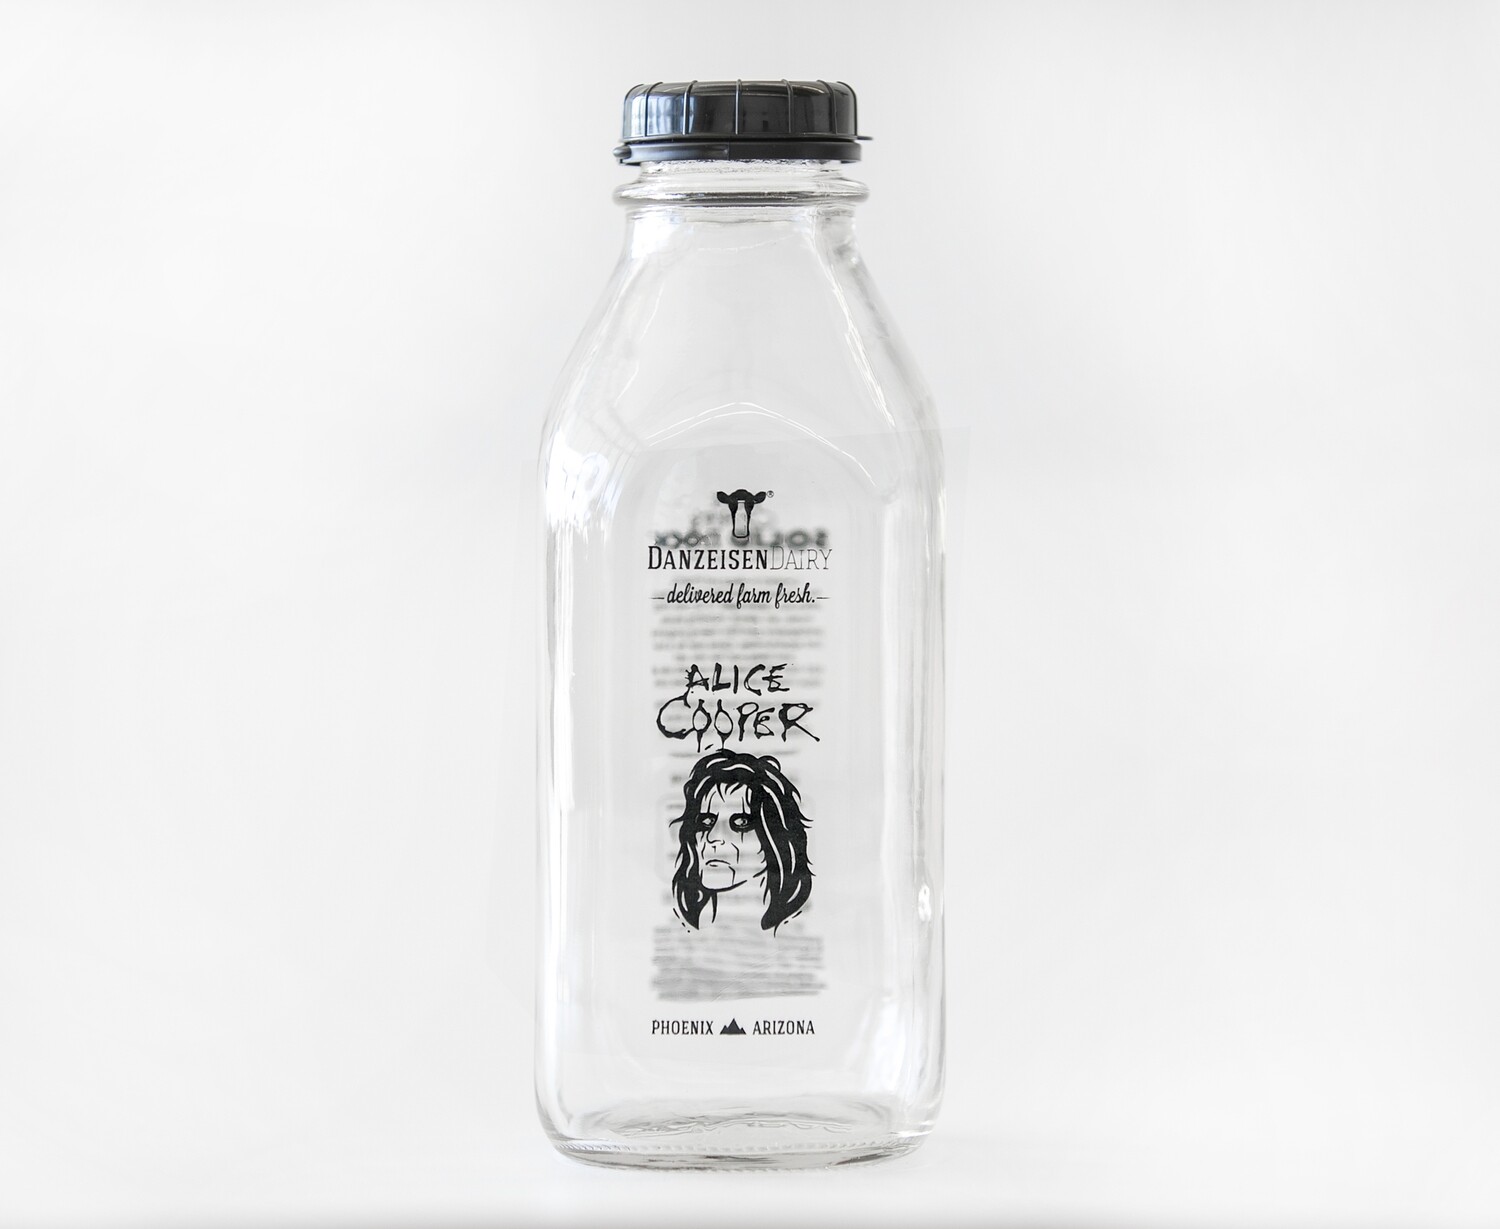 Special 2nd Edition Alice Cooper Bottle